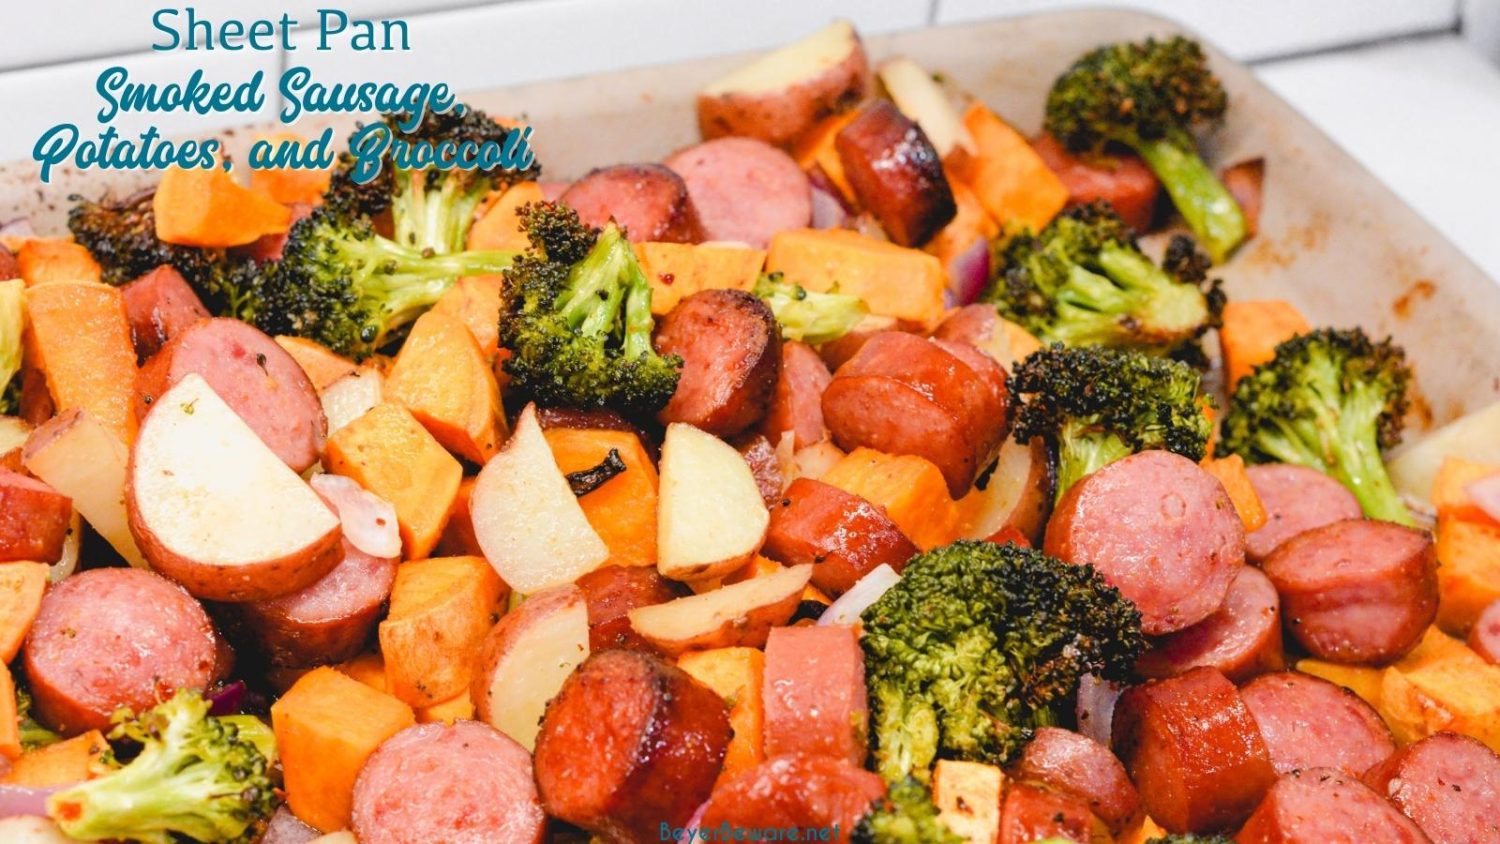 Sheet pan smoked sausage, potatoes, and broccoli is a simple oven roasted sausage and sweet potatoes meal that is full of flavors from onions and garlic and roasted in 45 minutes.